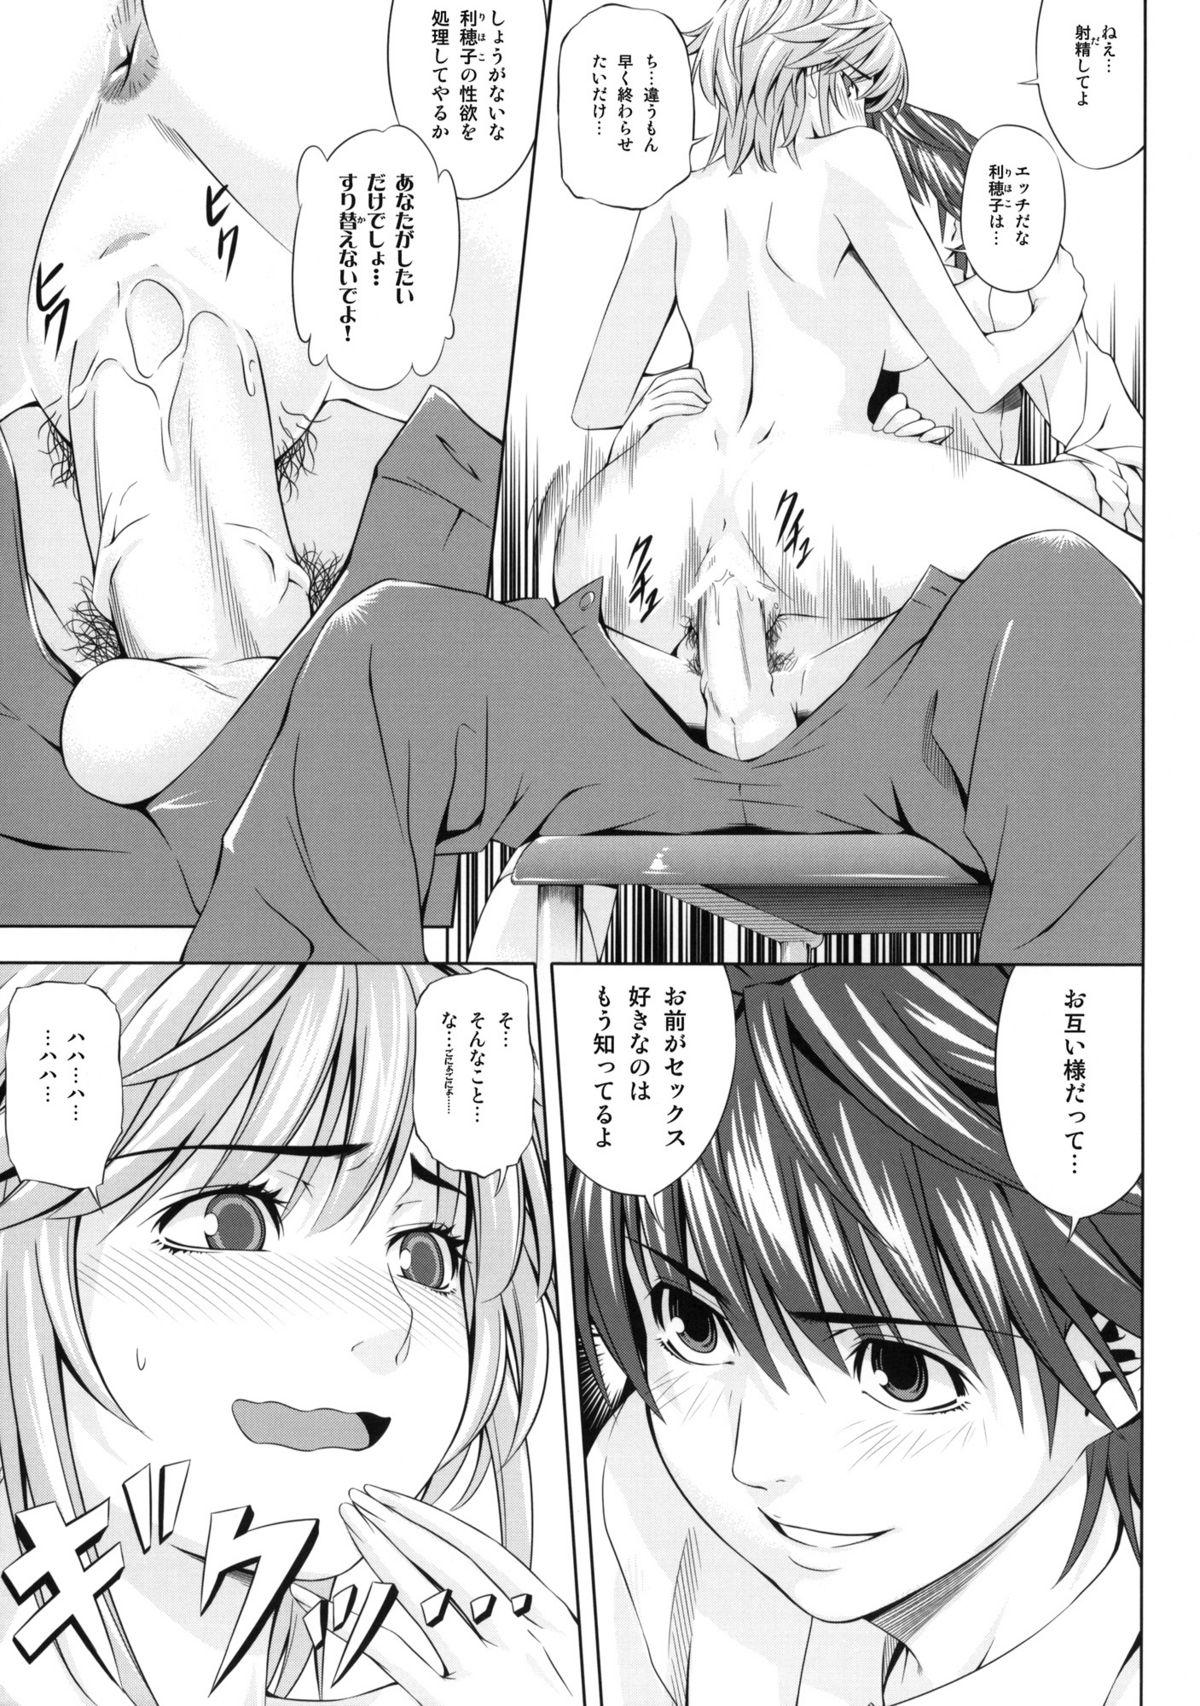 Village H2 AMA×2 AFTER - Amagami Ass - Page 6